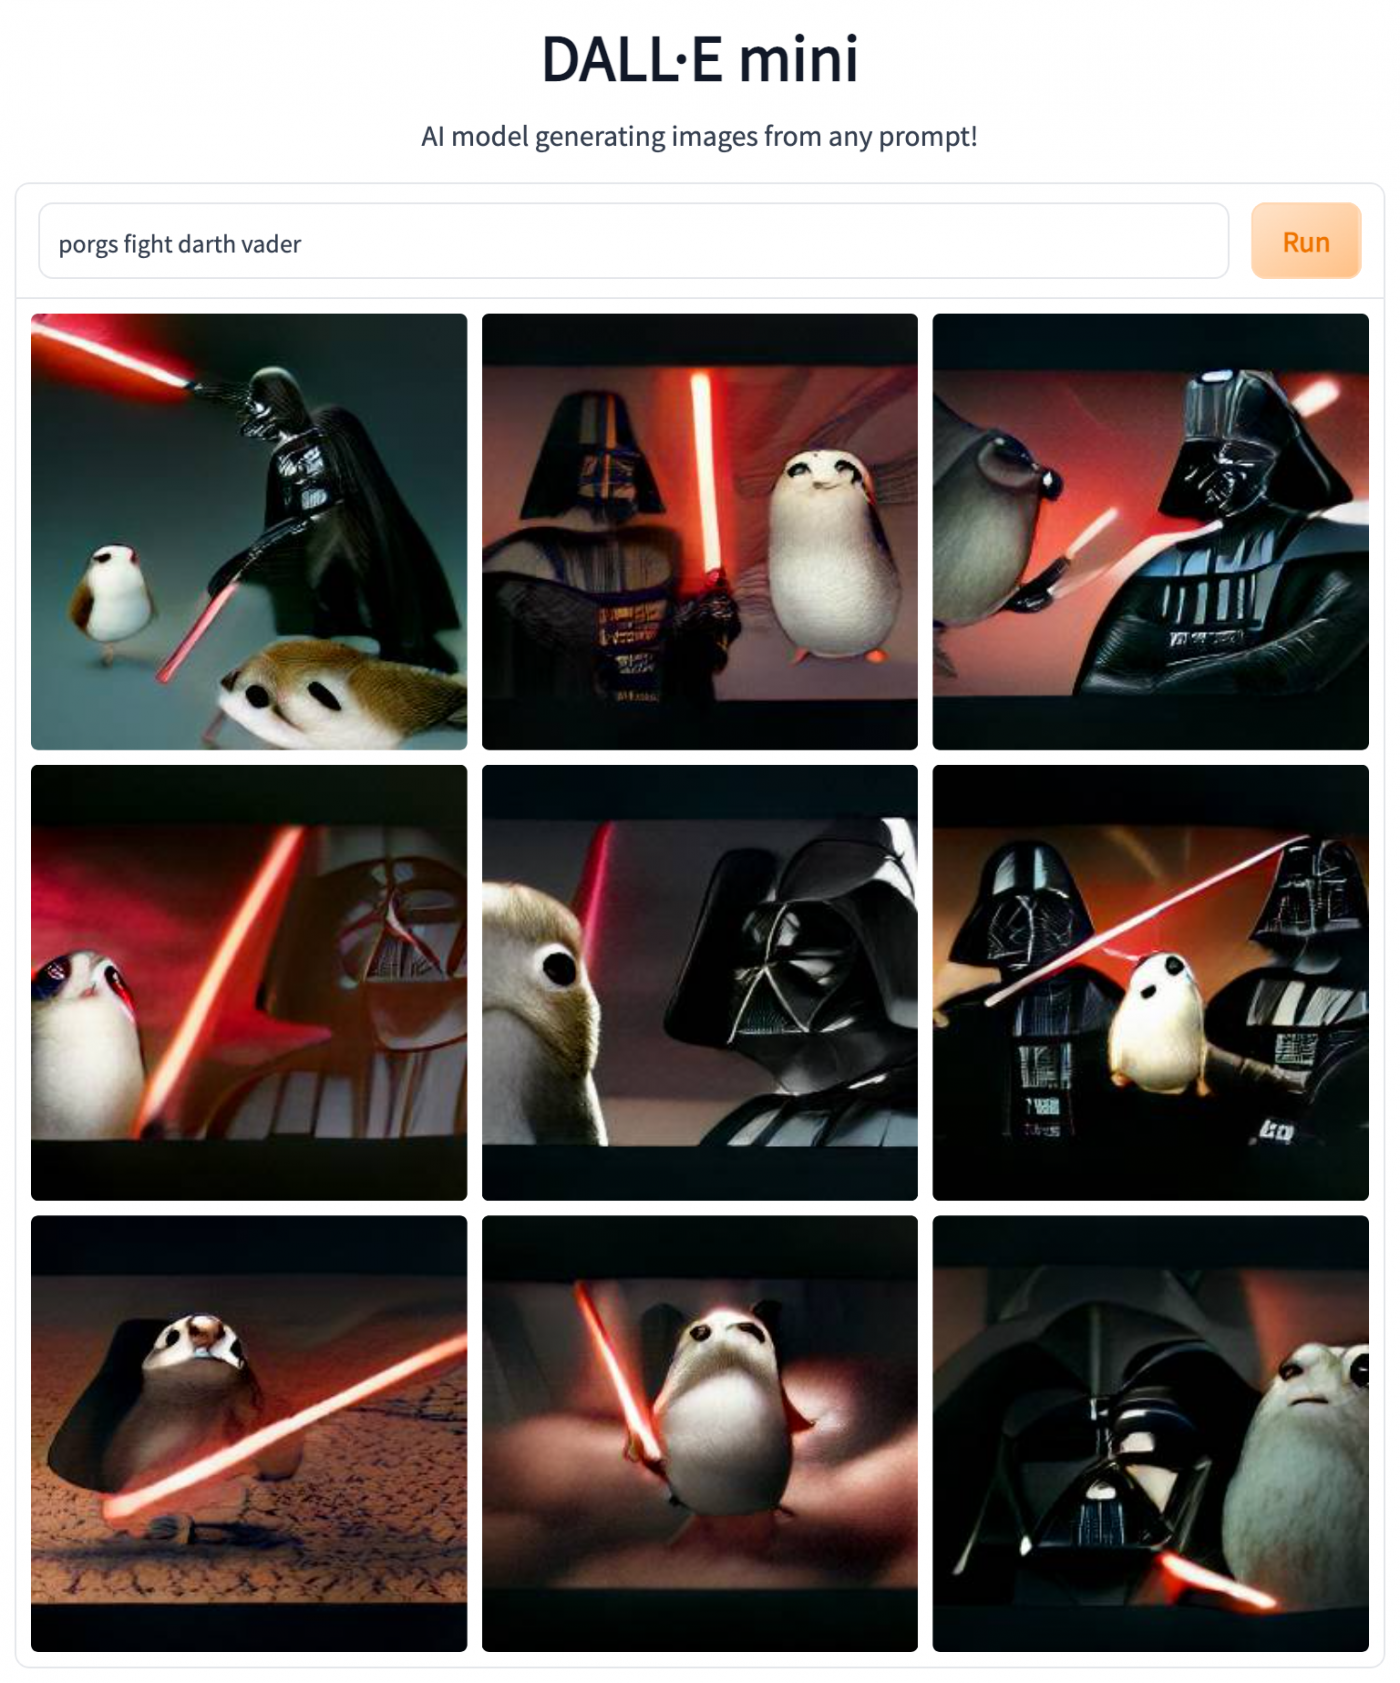 Porgs Wield Lightsabers &amp; Fight Darth Vader In Hysterical AI Art